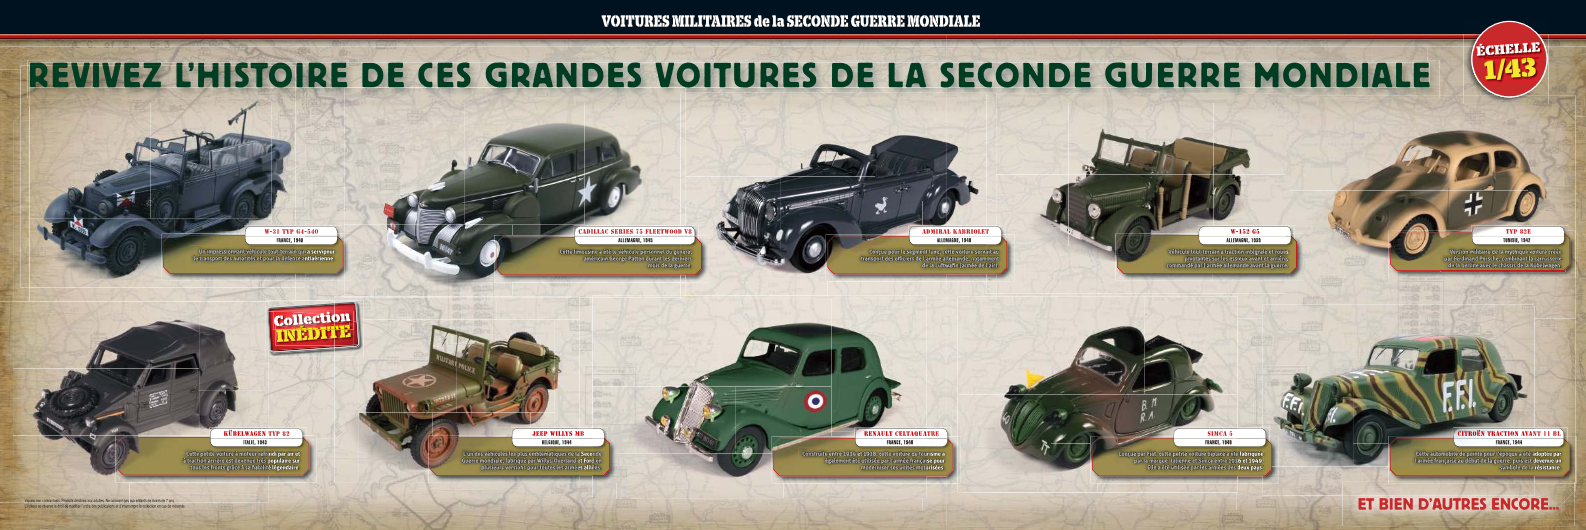 vehicule militaire collection presse